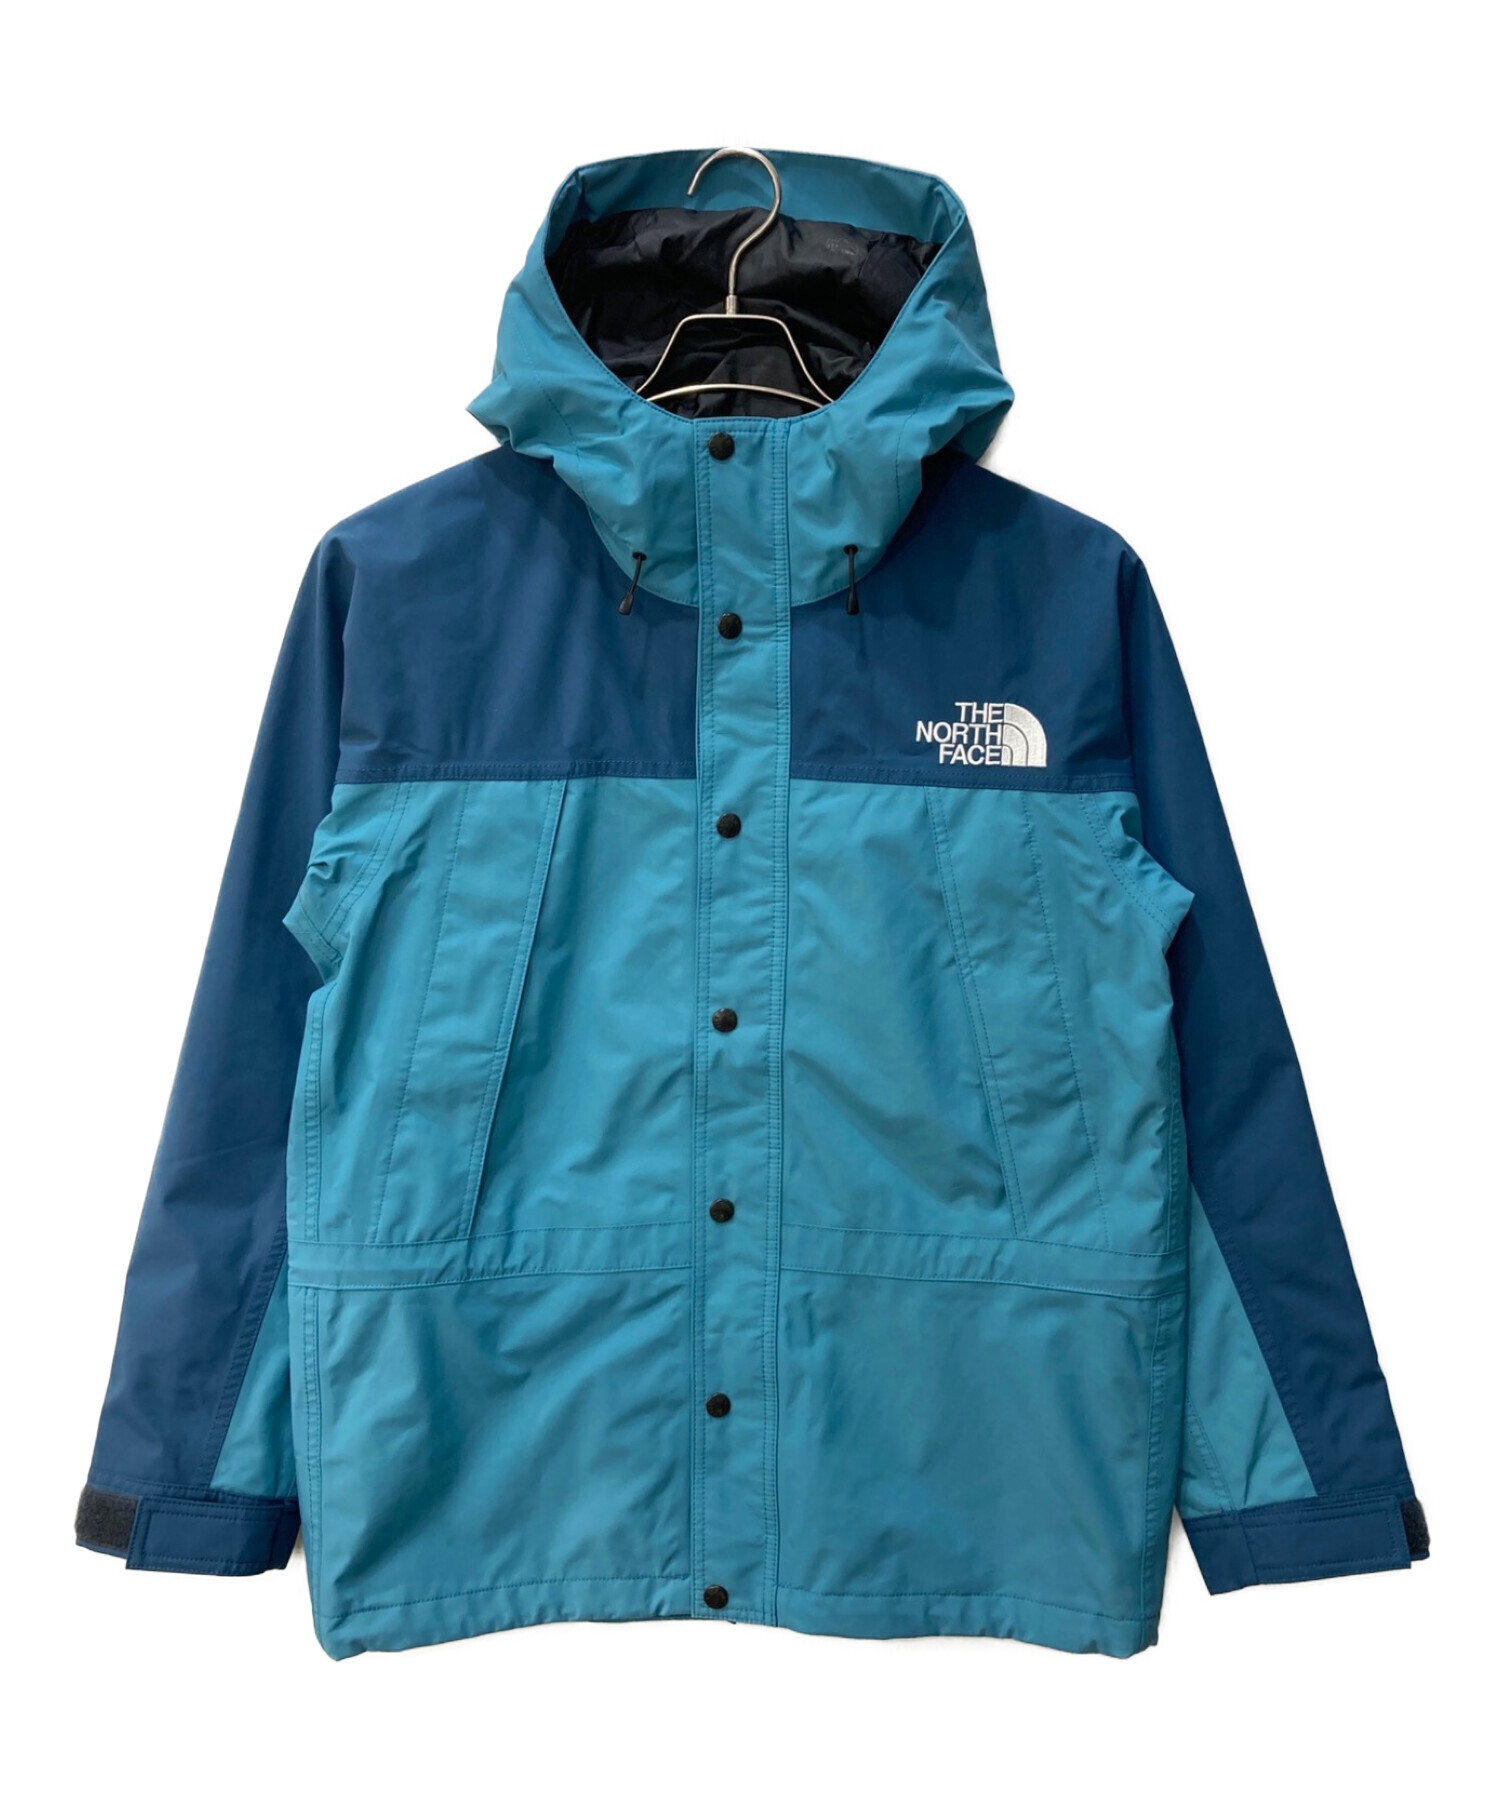 THE NORTH FACE Mountain Light Jacket SM